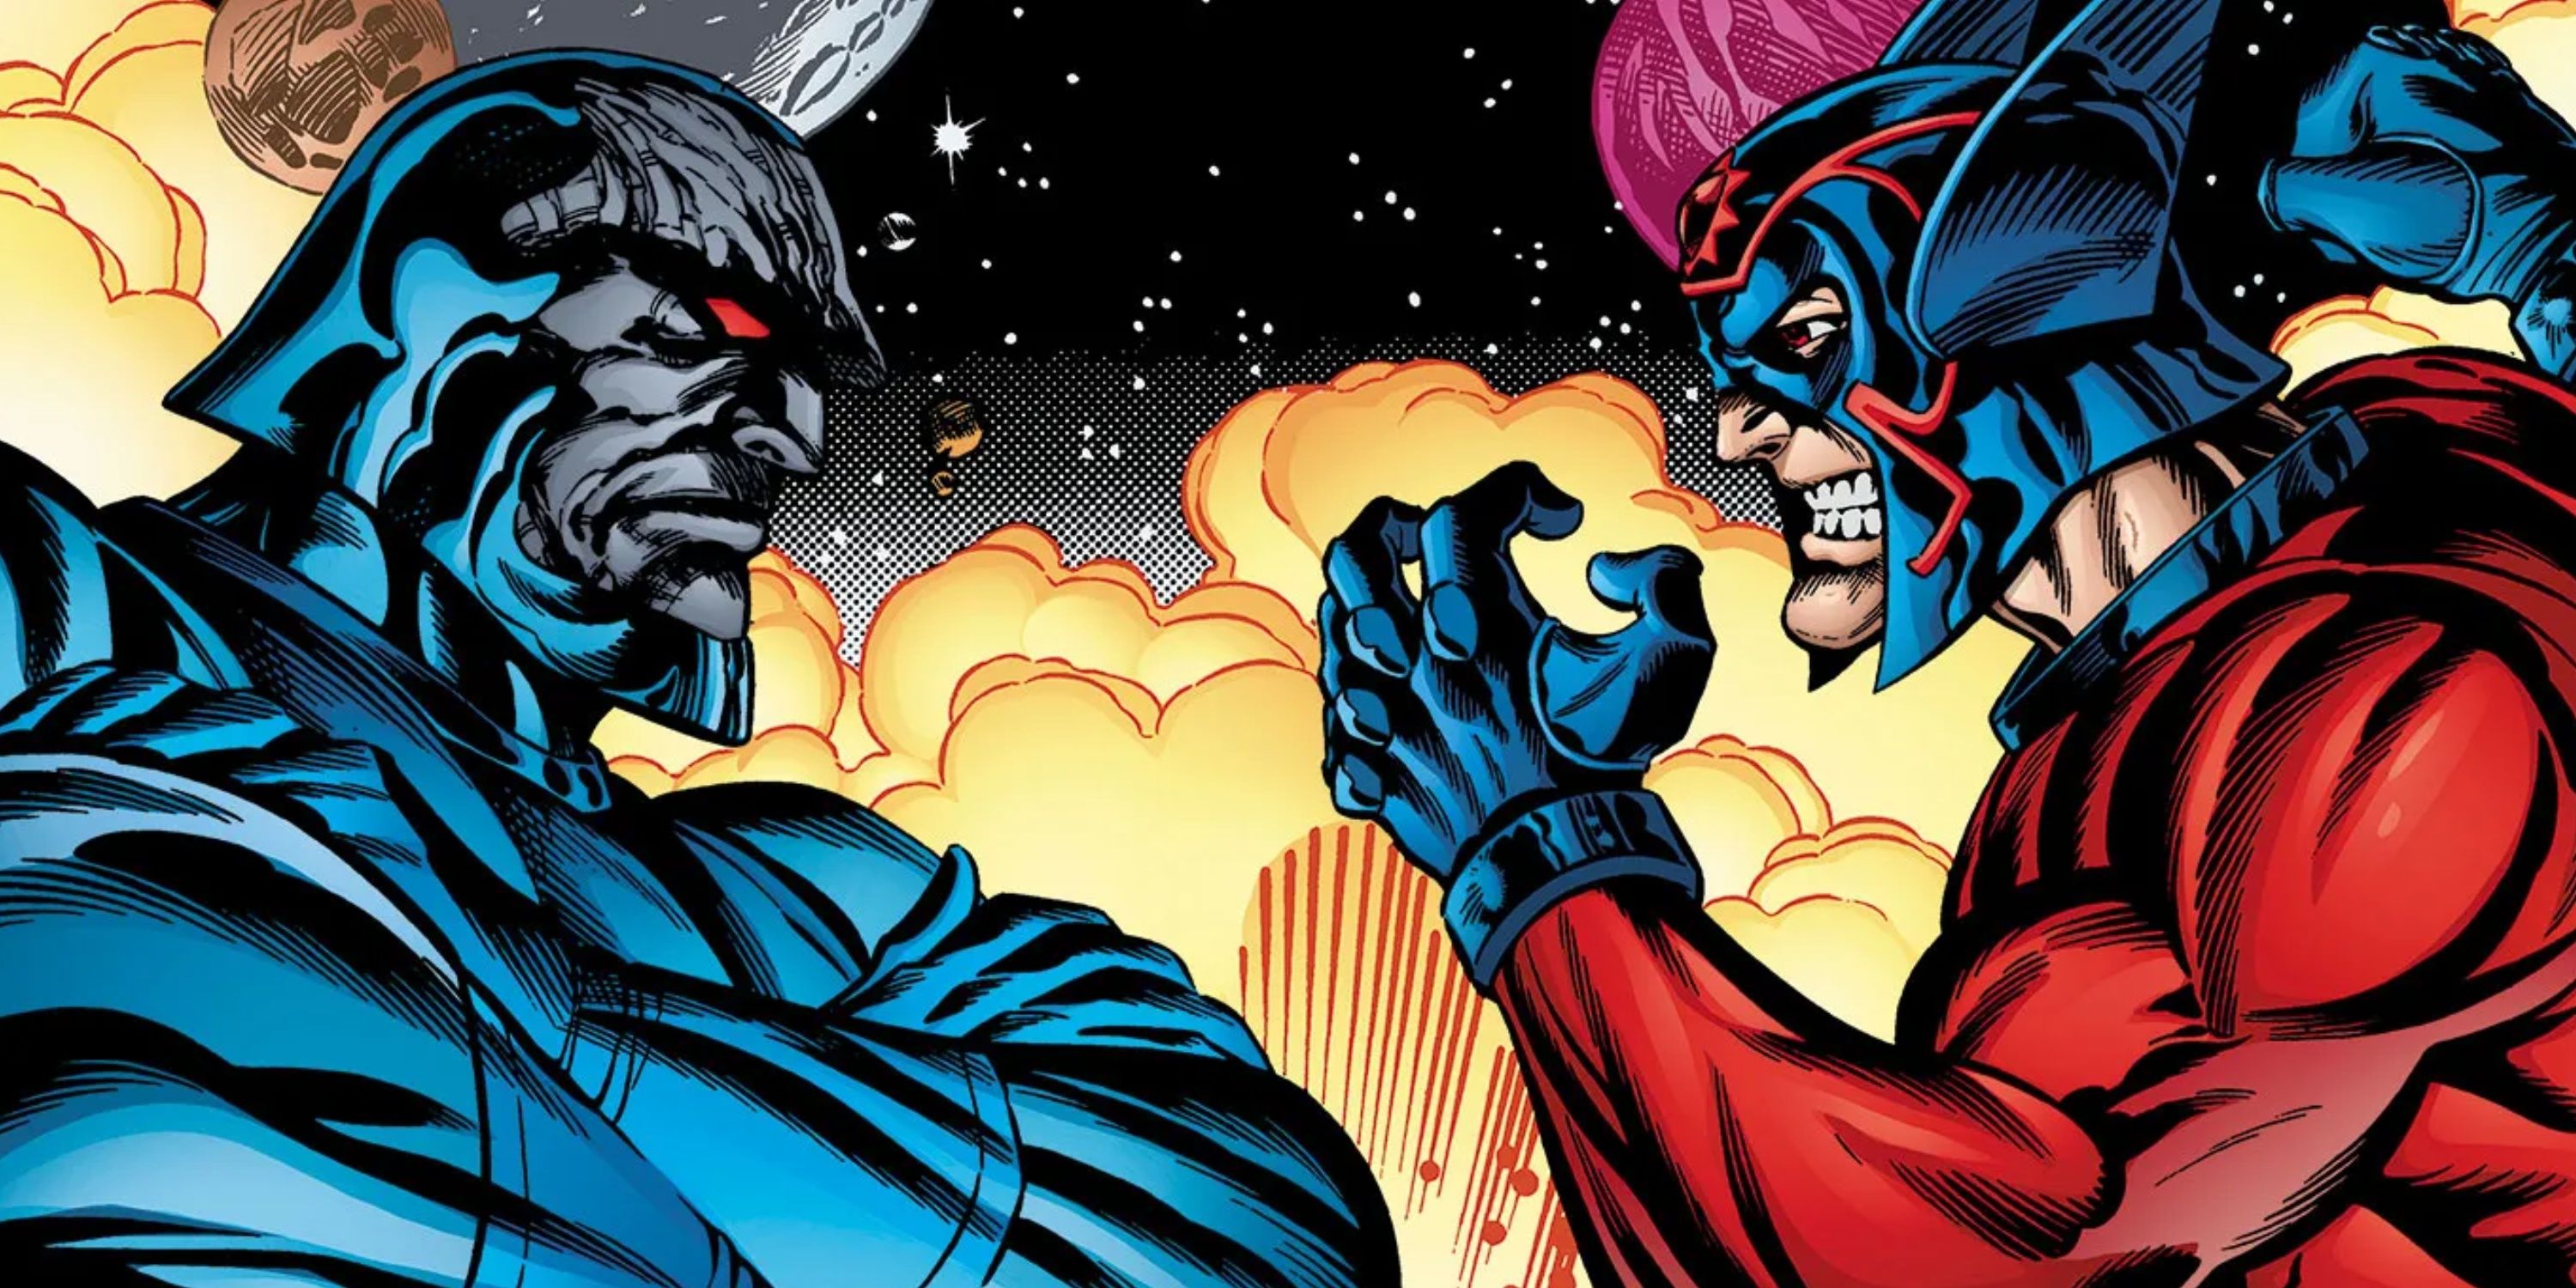 Darkseid stares down Orion as he gets ready for battle